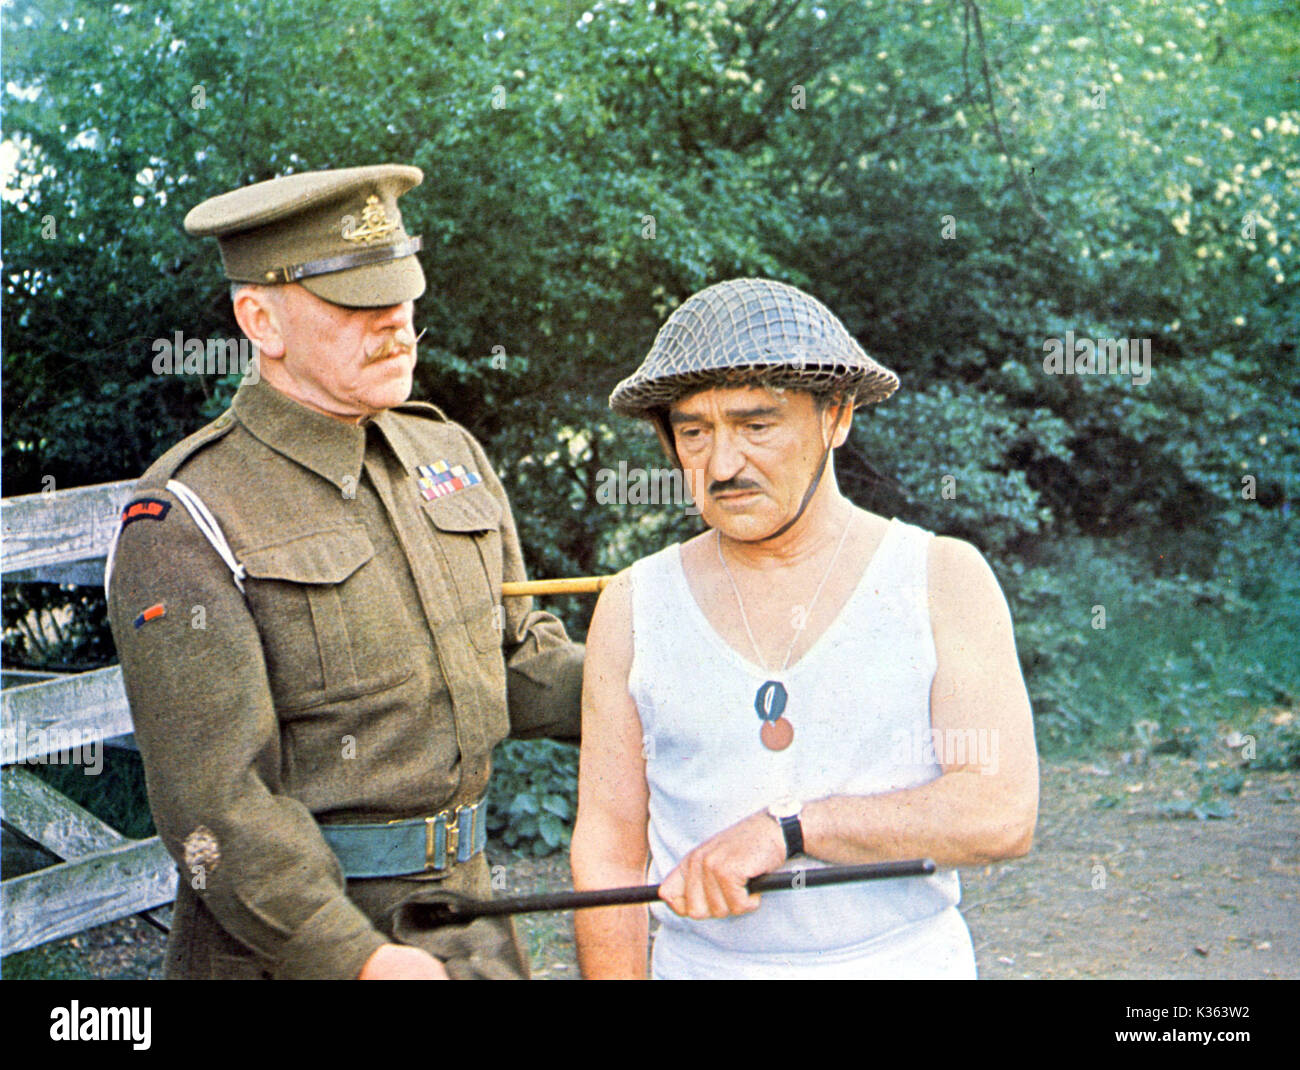 COPYRIGHT DI CARRY ON ENGLAND: CARLTON / RANK WINDSOR DAVIES, KENNETH CONNOR CARRY ON ENGLAND WINDSOR DAVIES, KENNETH CONNOR data: 1976 Foto Stock